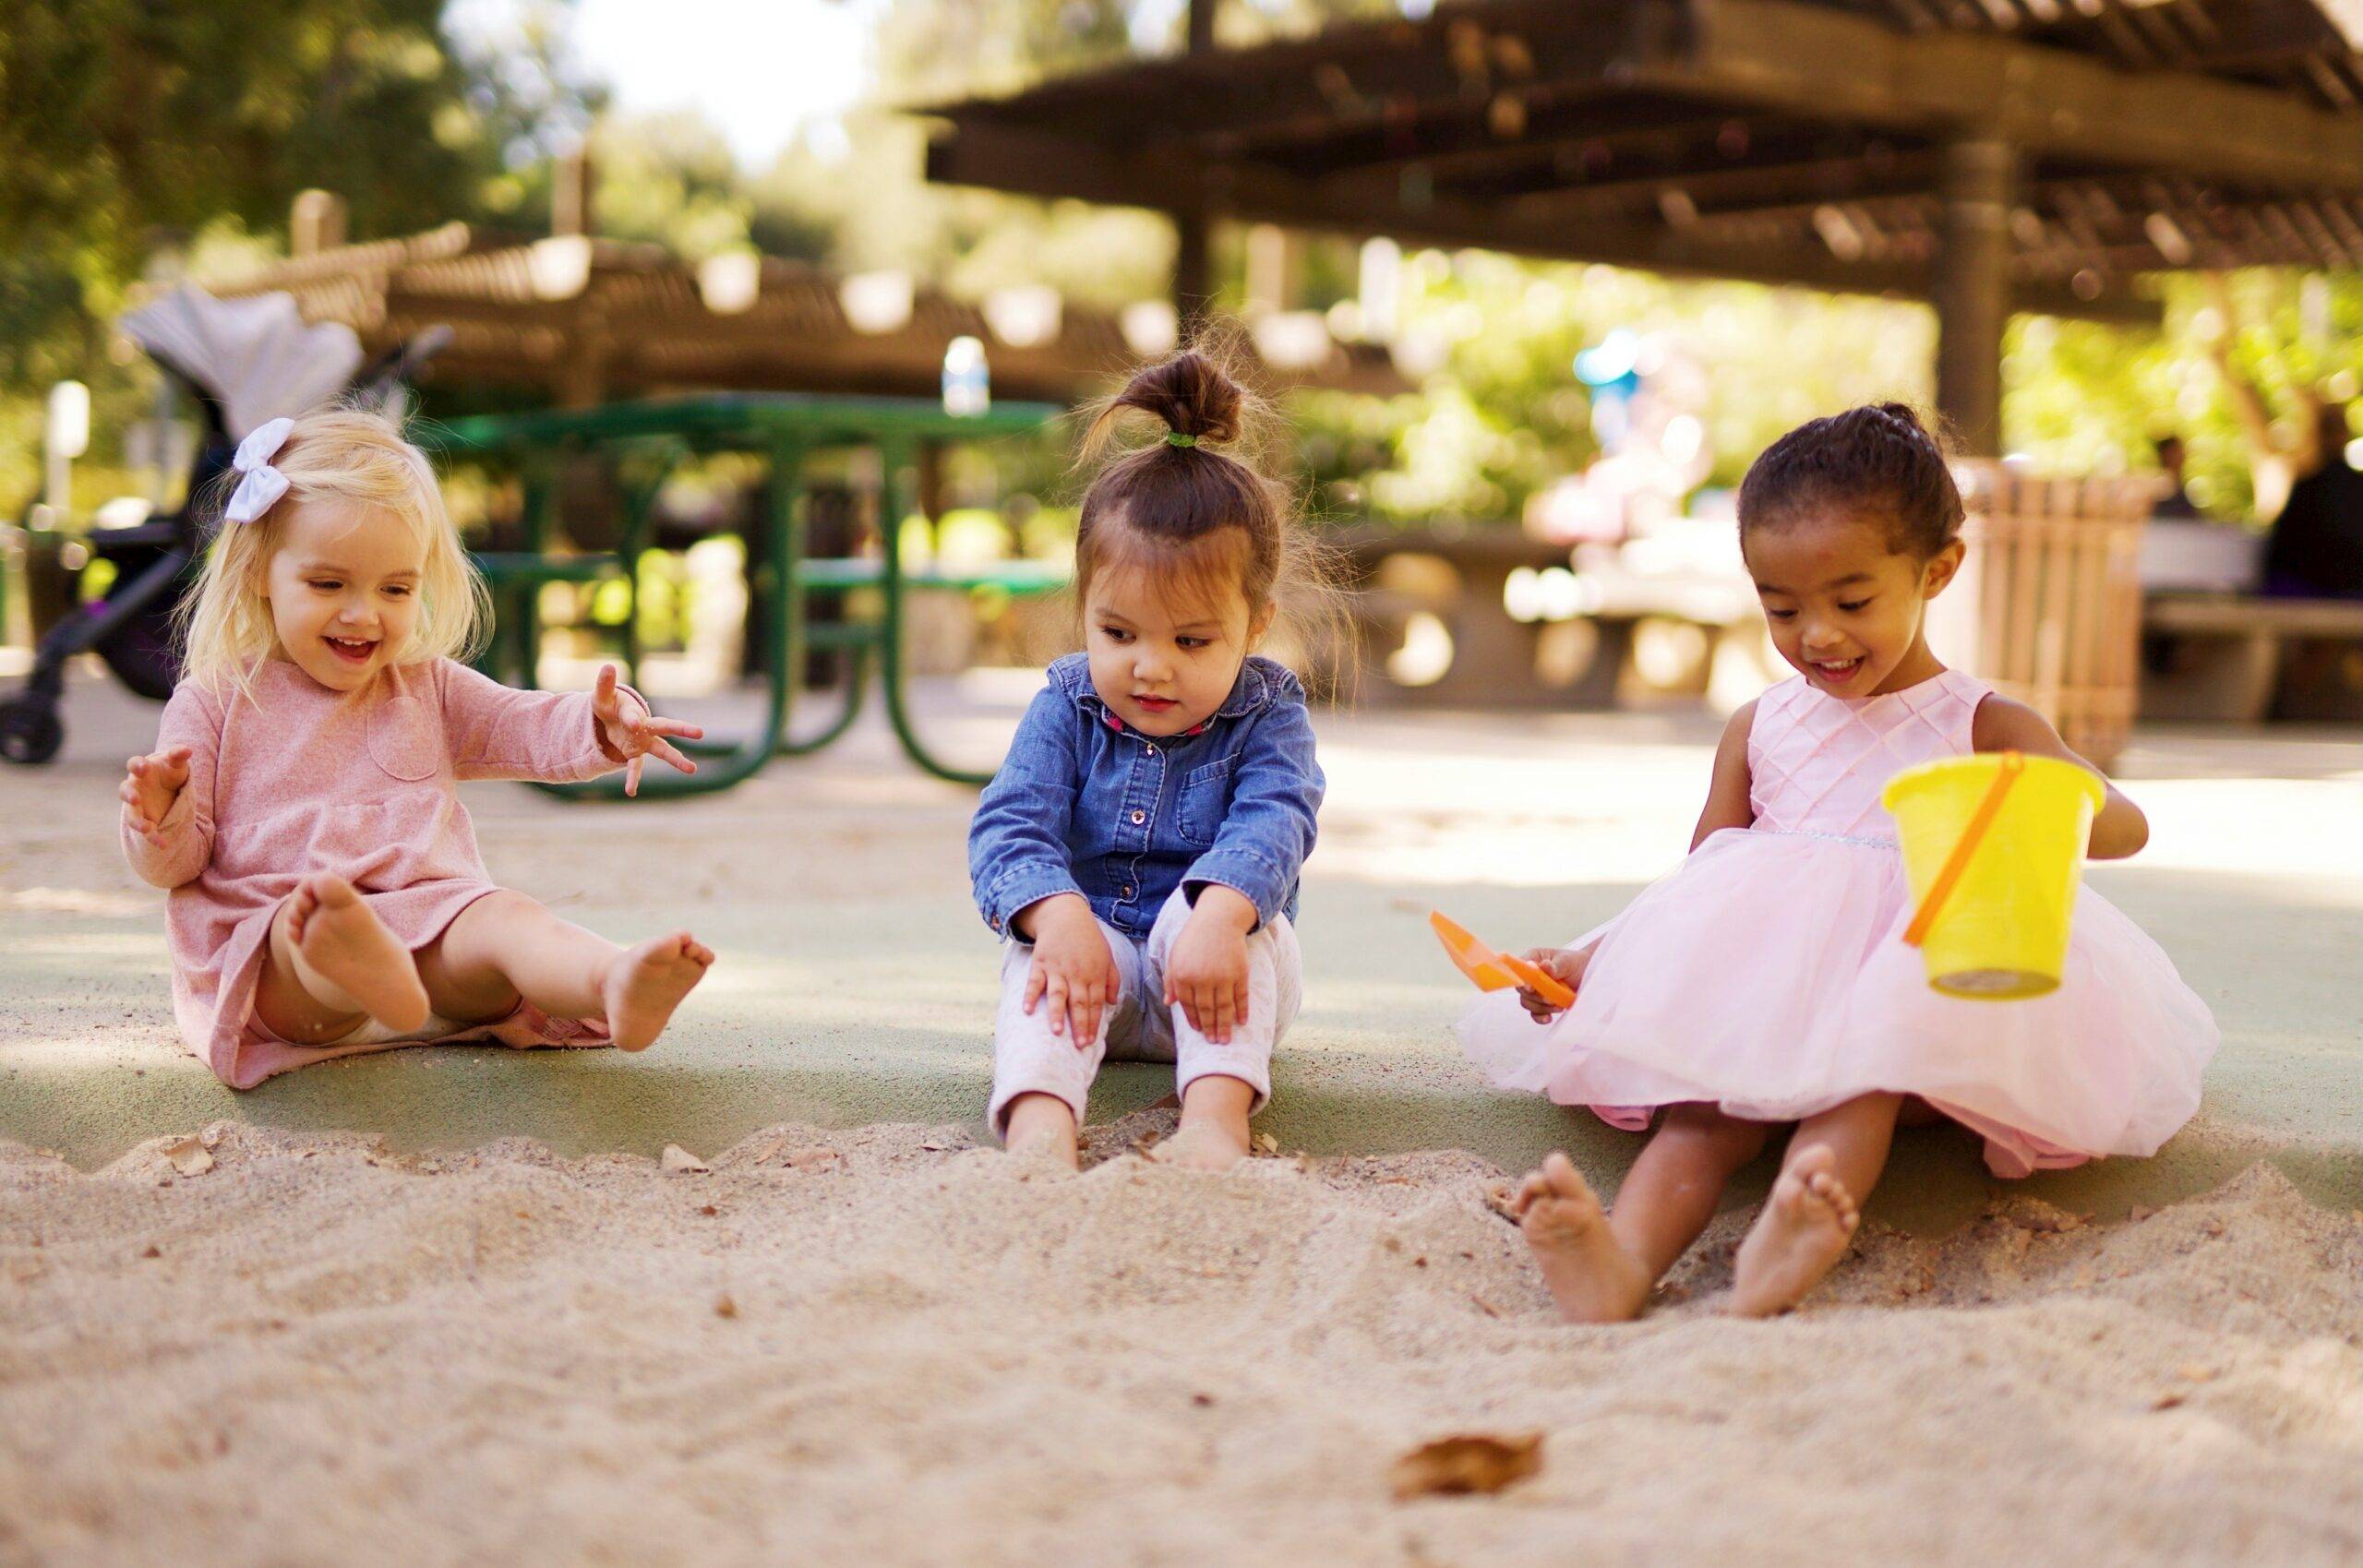 Children playing in a sandpit